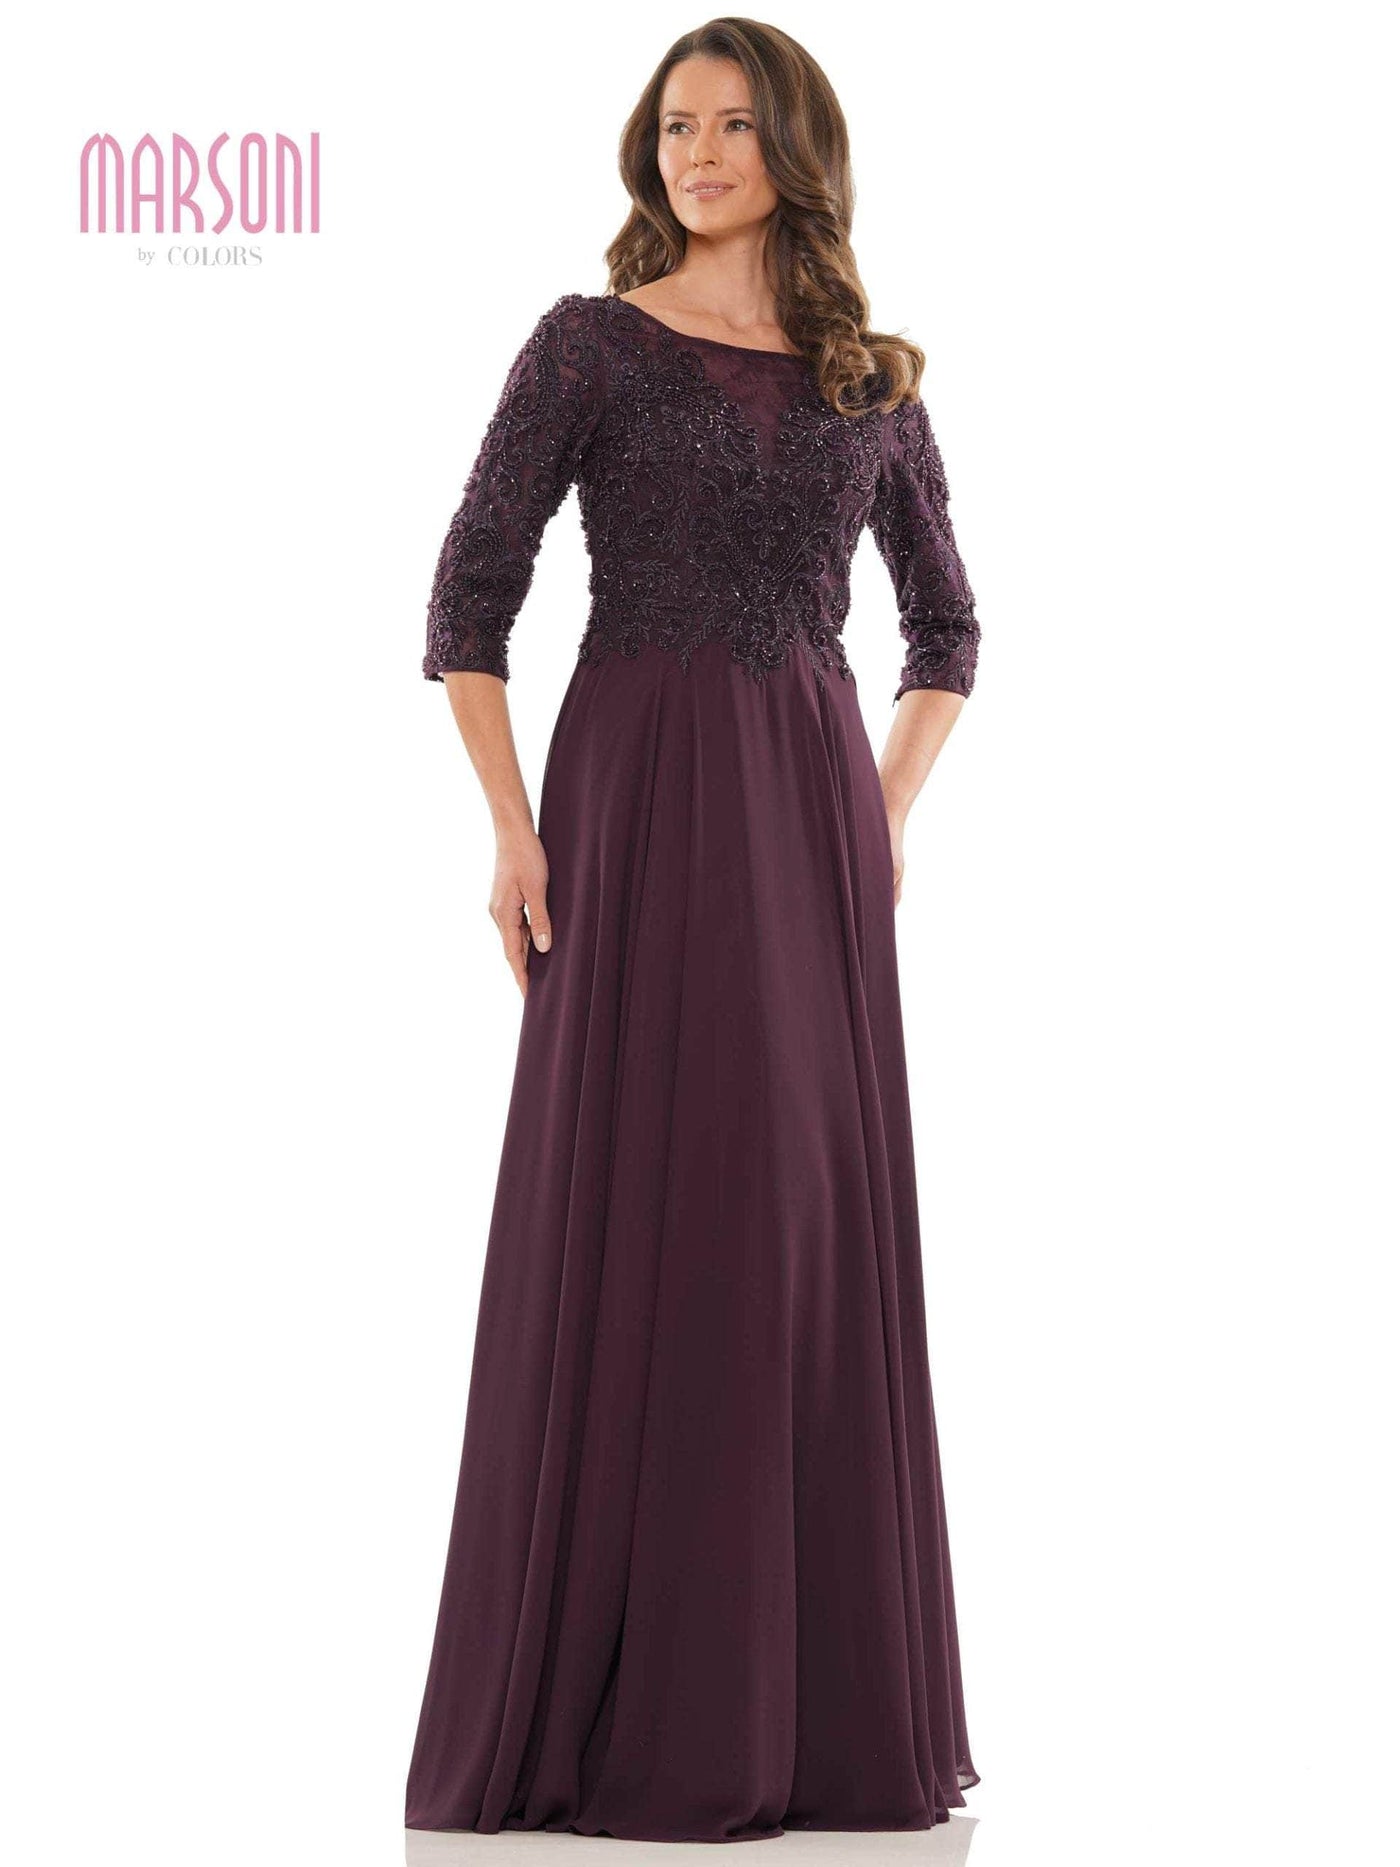 Marsoni by Colors - MV1052 Embroidered Bateau Chiffon A-line Gown Mother of the Bride Dresses 6 / Eggplant